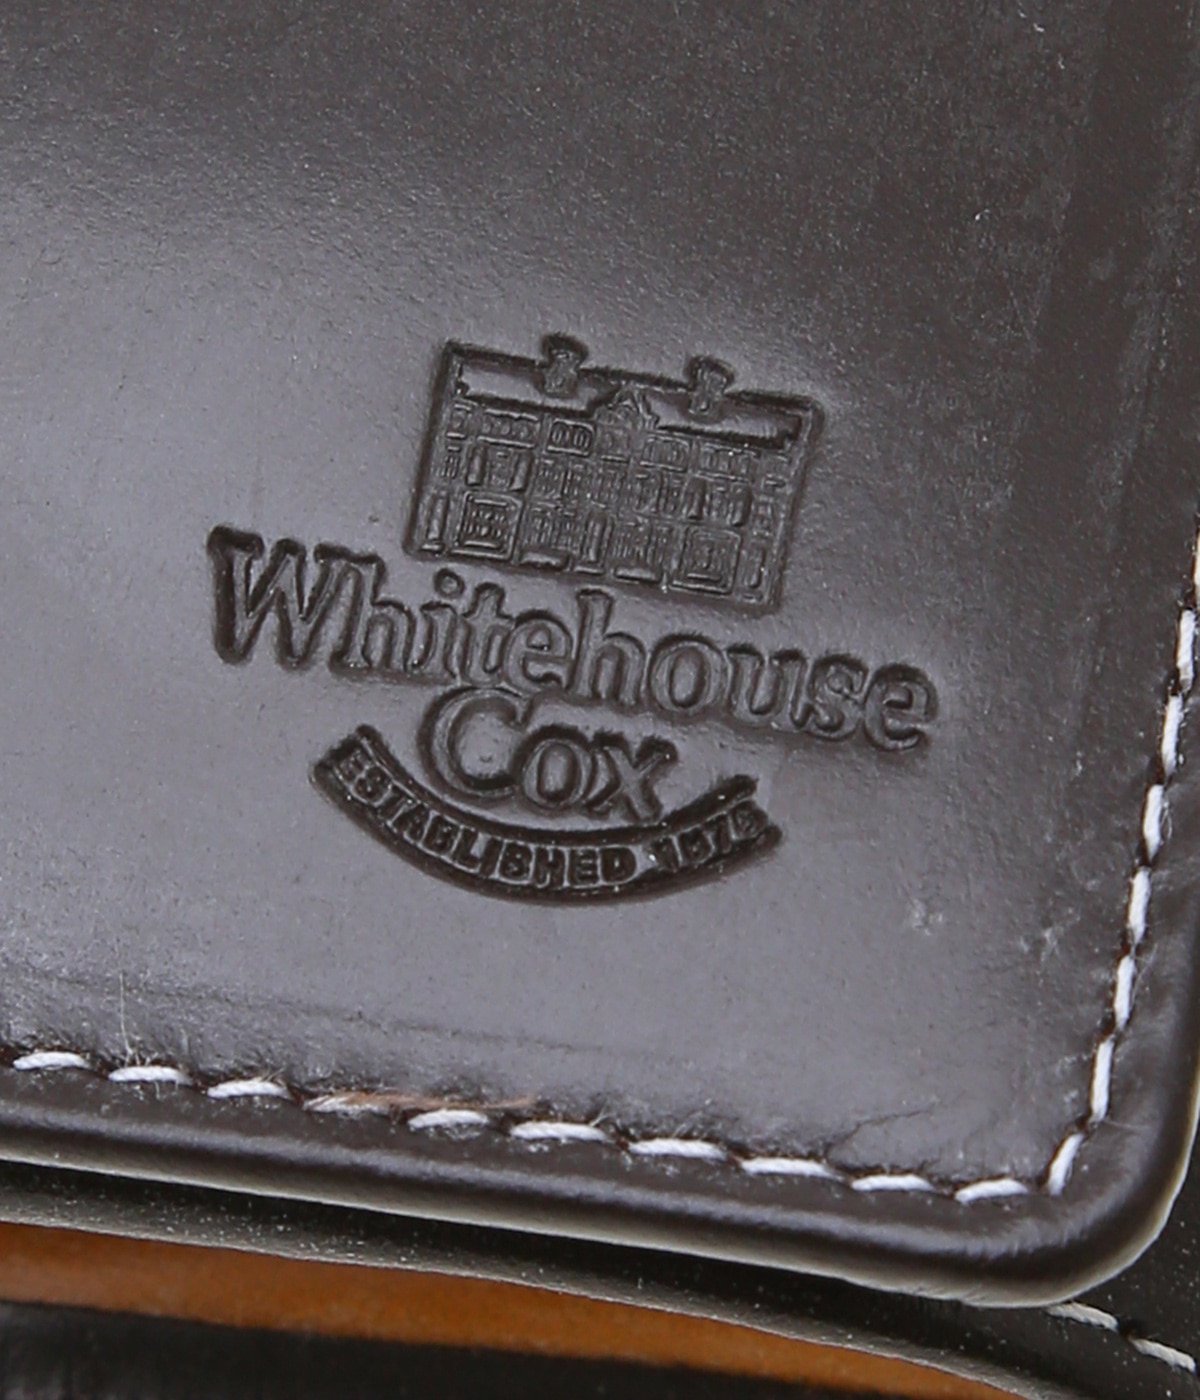 Whitehouse Cox(ホワイトハウスコックス) BRIDLE COMPACT WALLET 